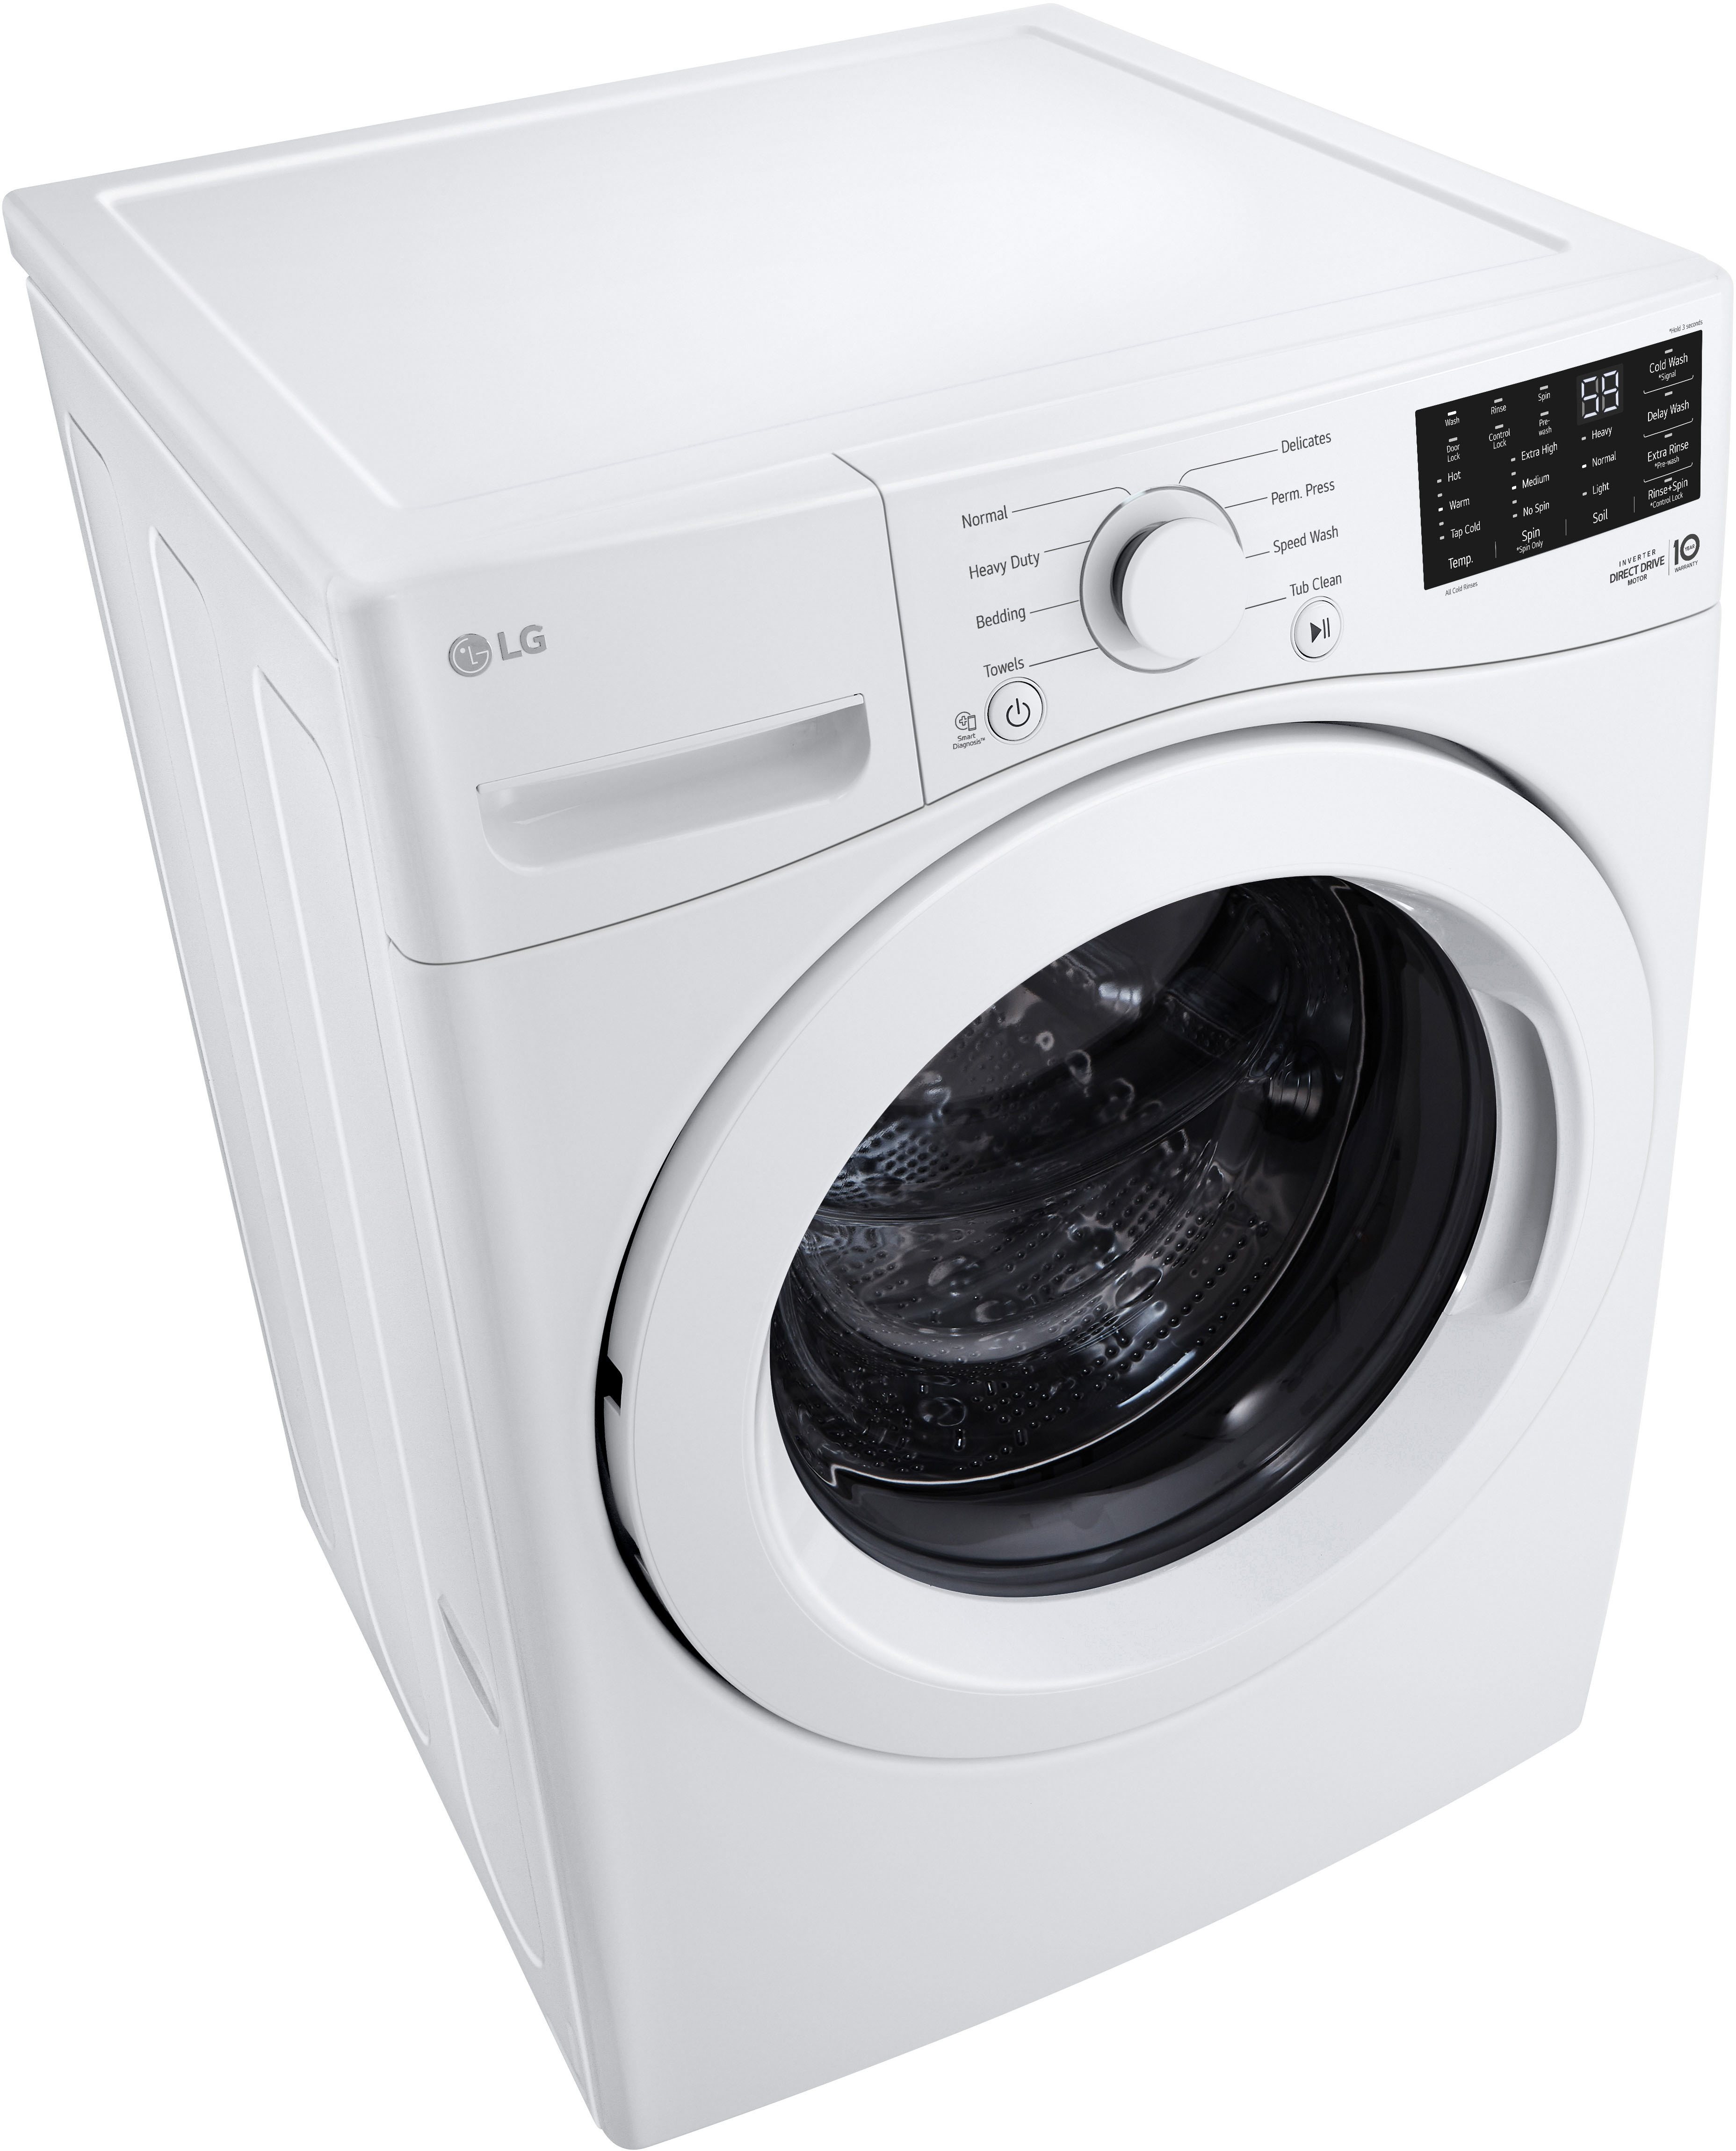 WM3470CW Front Buy Ft. Washer Cu. 6Motion 5.0 White - with High-Efficiency Technology LG Load Best